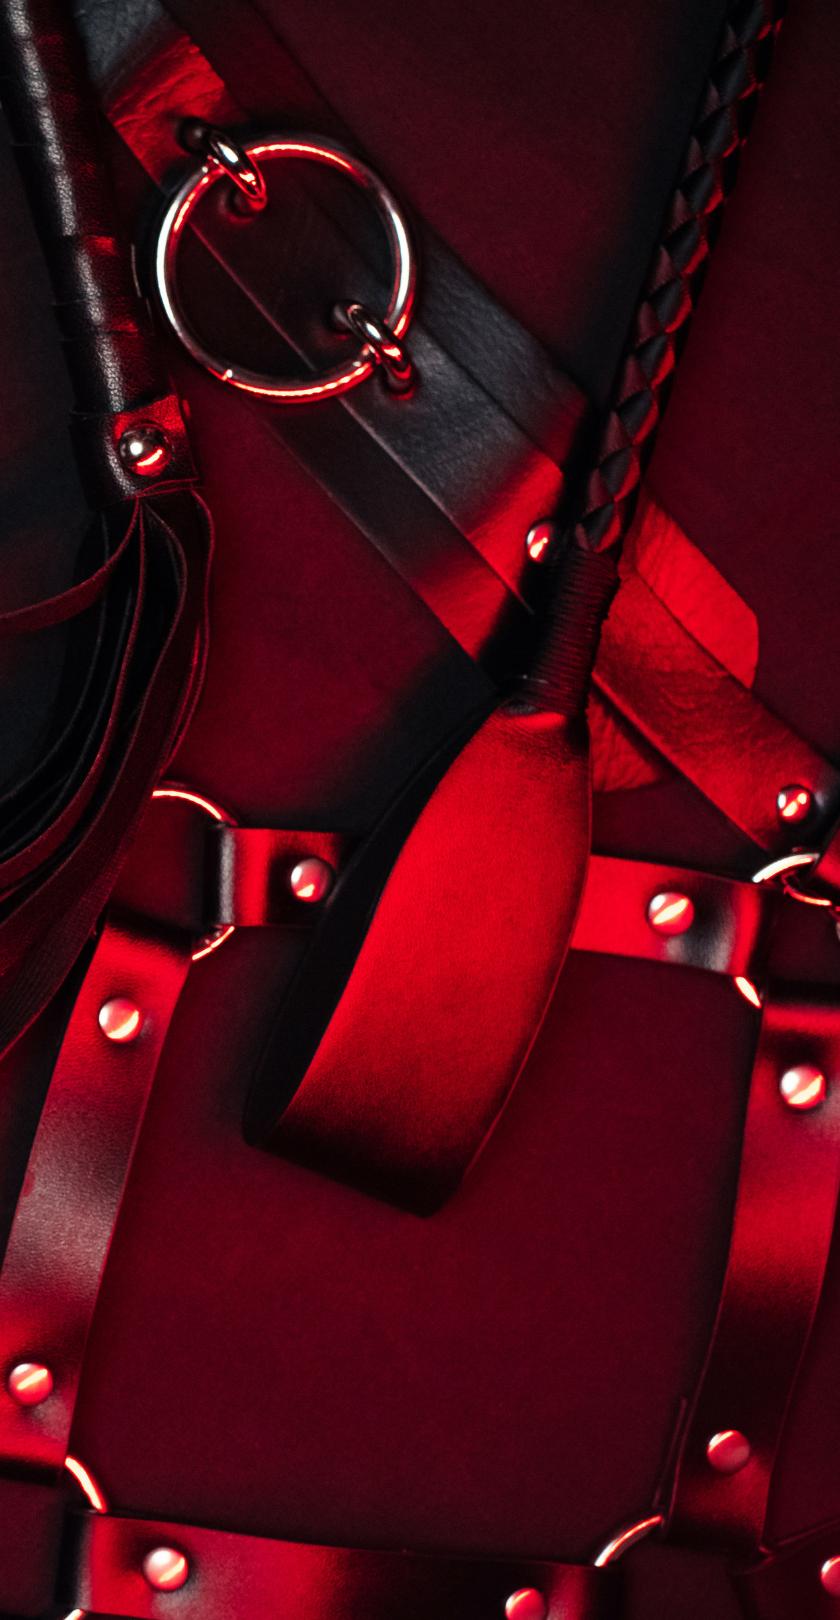 All kink and BDSM products from Eden's Temple Kink Boutique